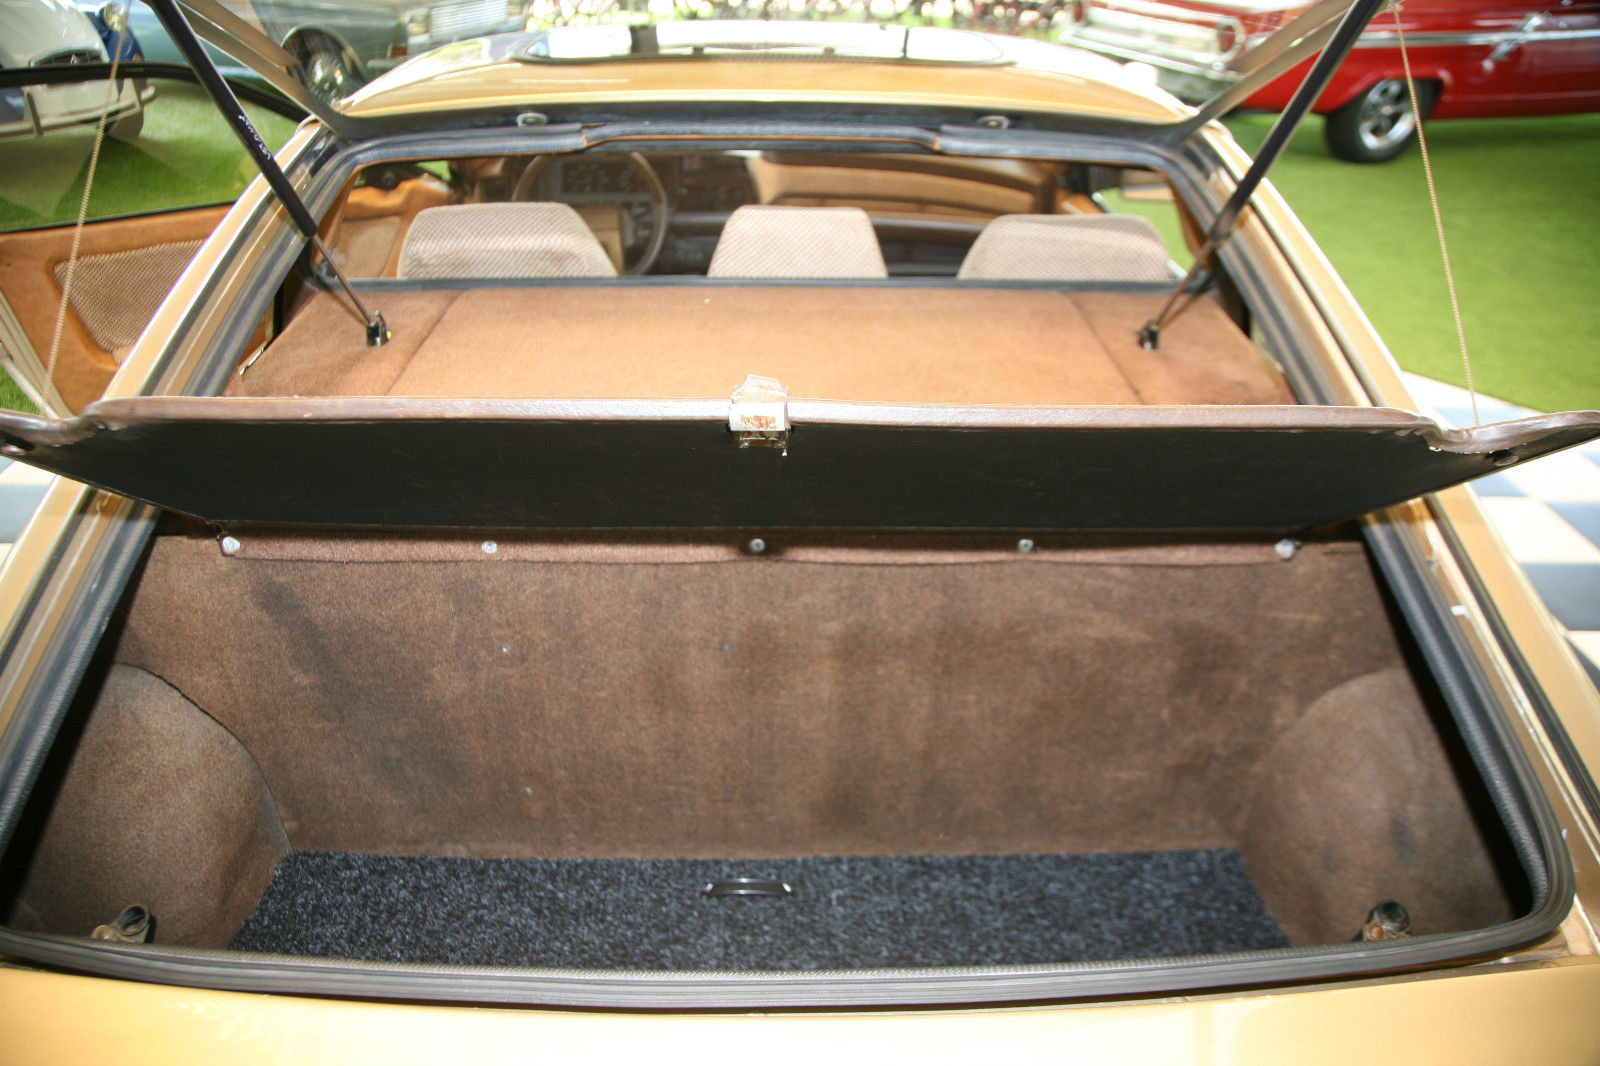 Luggage space is modest. The mid-engine sits in the compartment ahead of the luggage area.